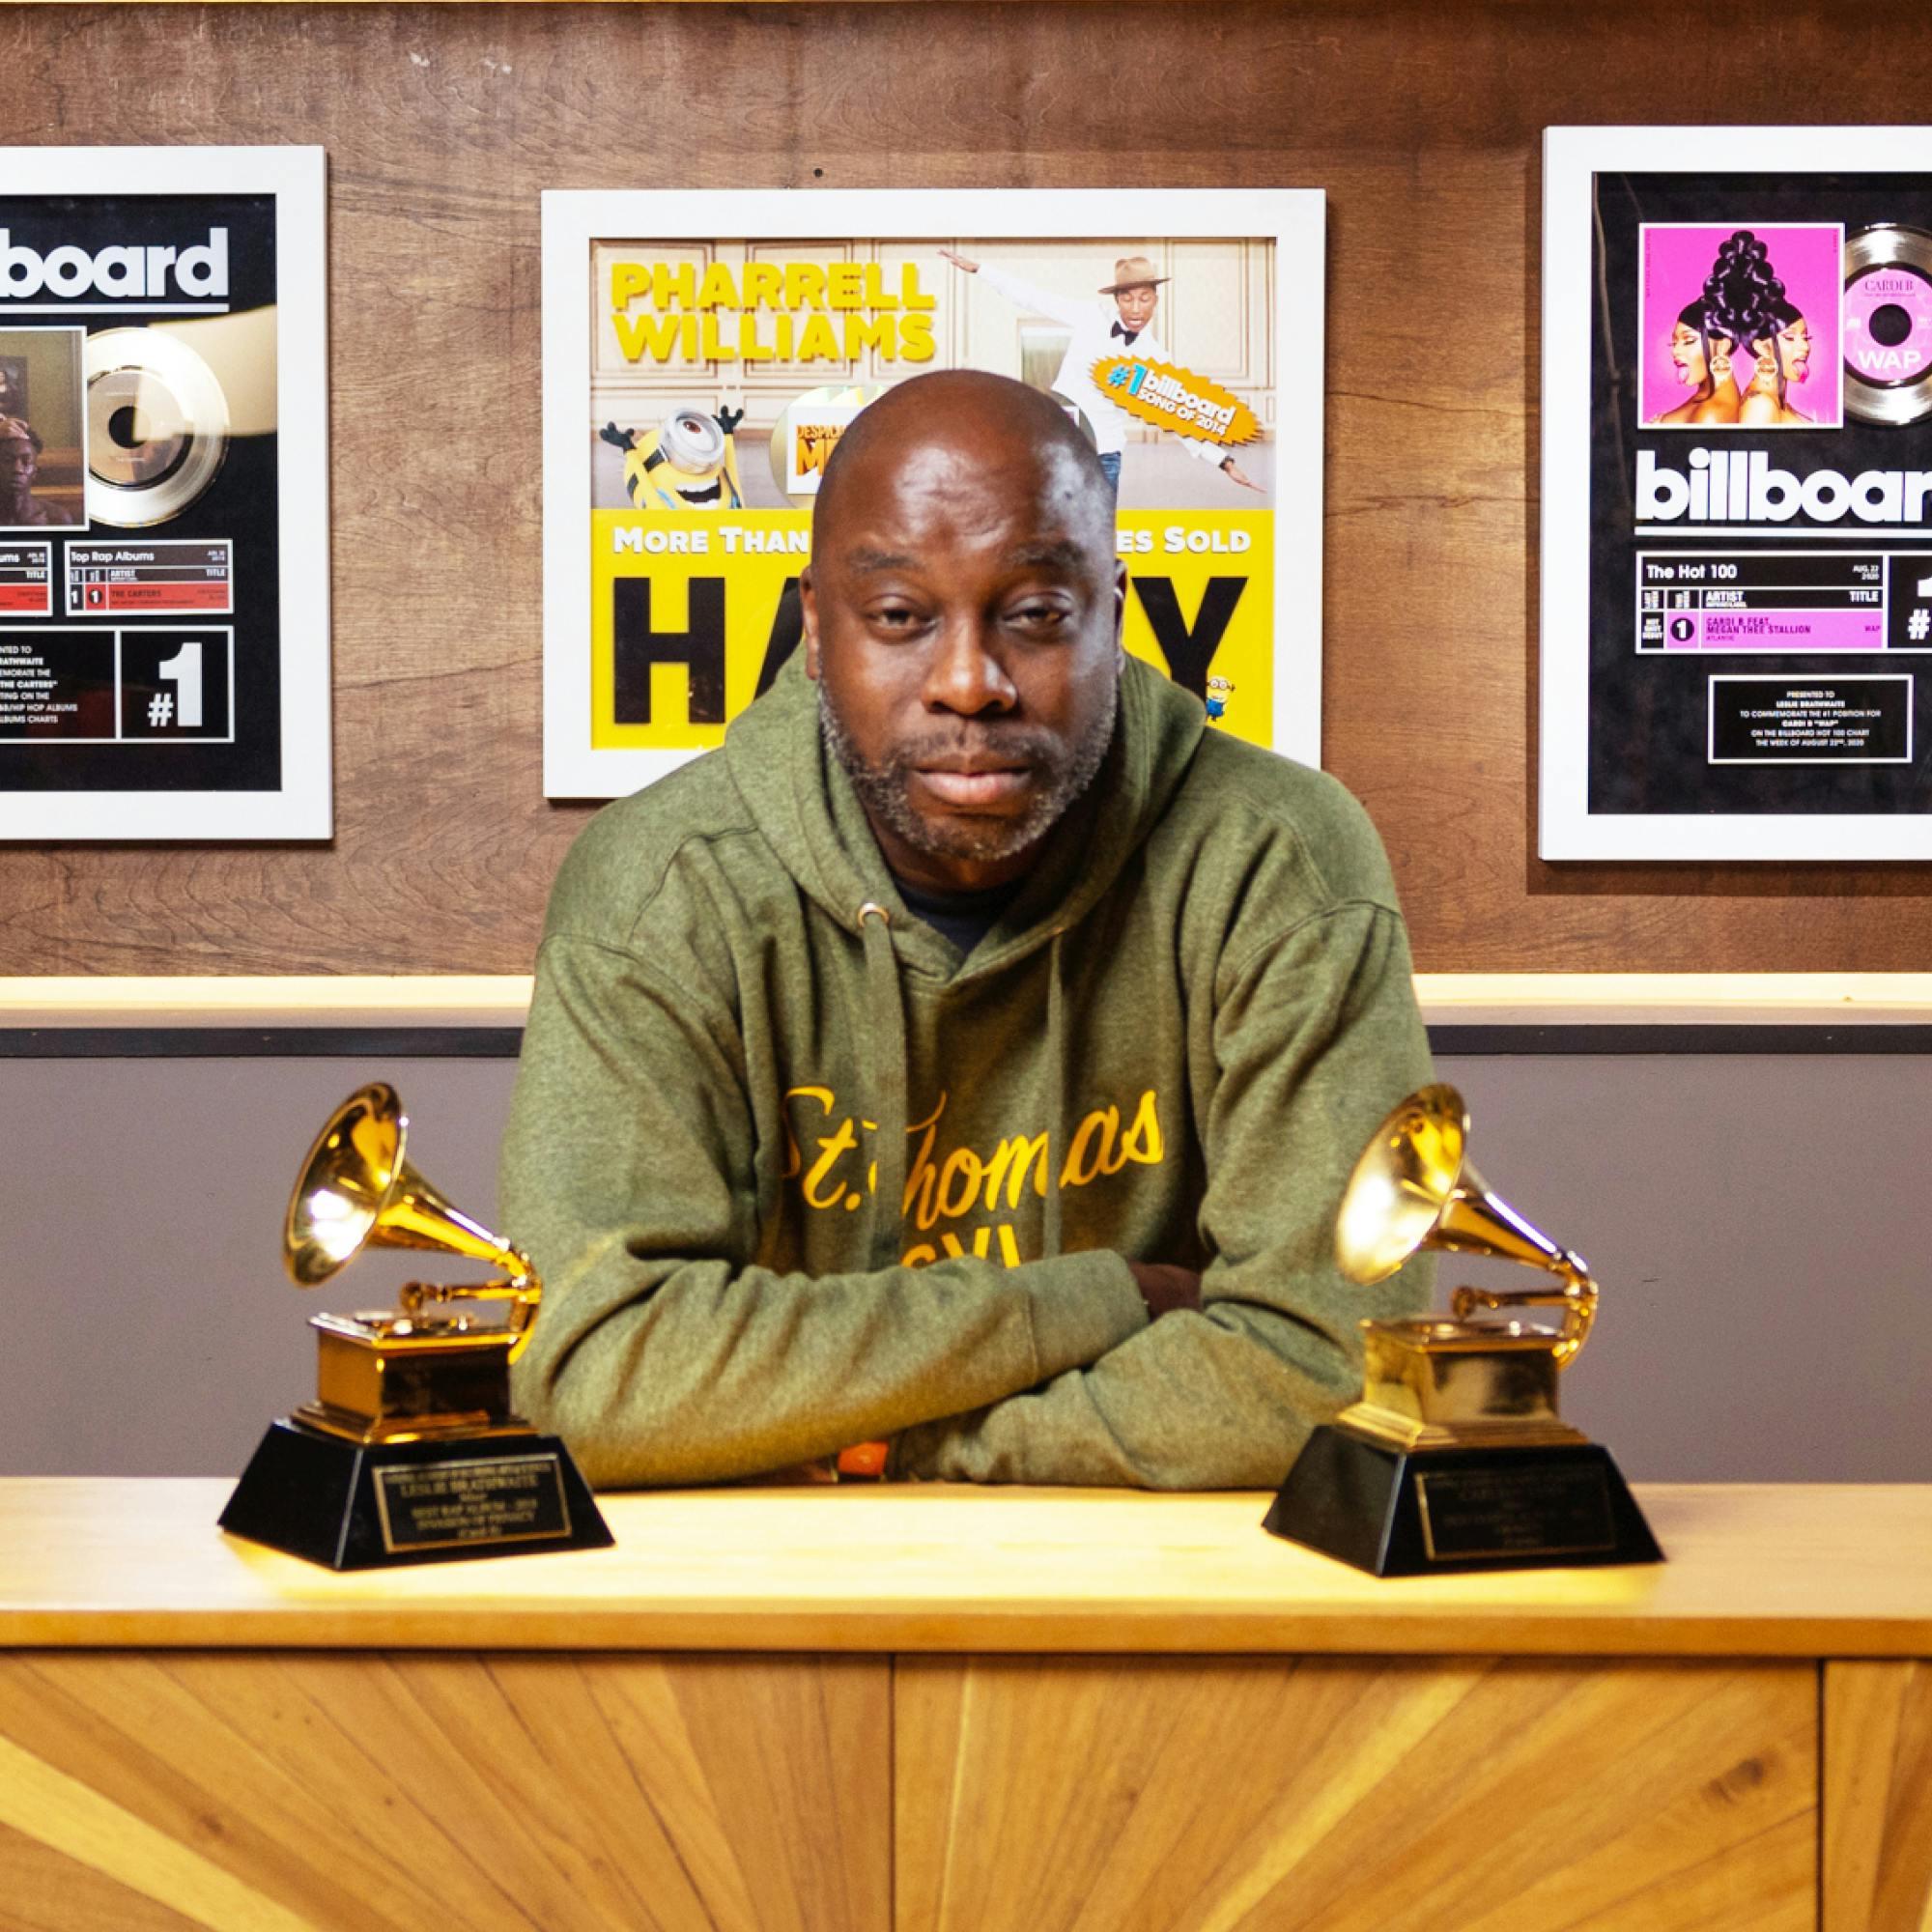 Leslie Brathwaite, wearing a green hoodie, sits with his arms folded on a desk with two of his Grammy awards in front of him. Behind him are framed gold records and billboard awards of songs he has mixed.